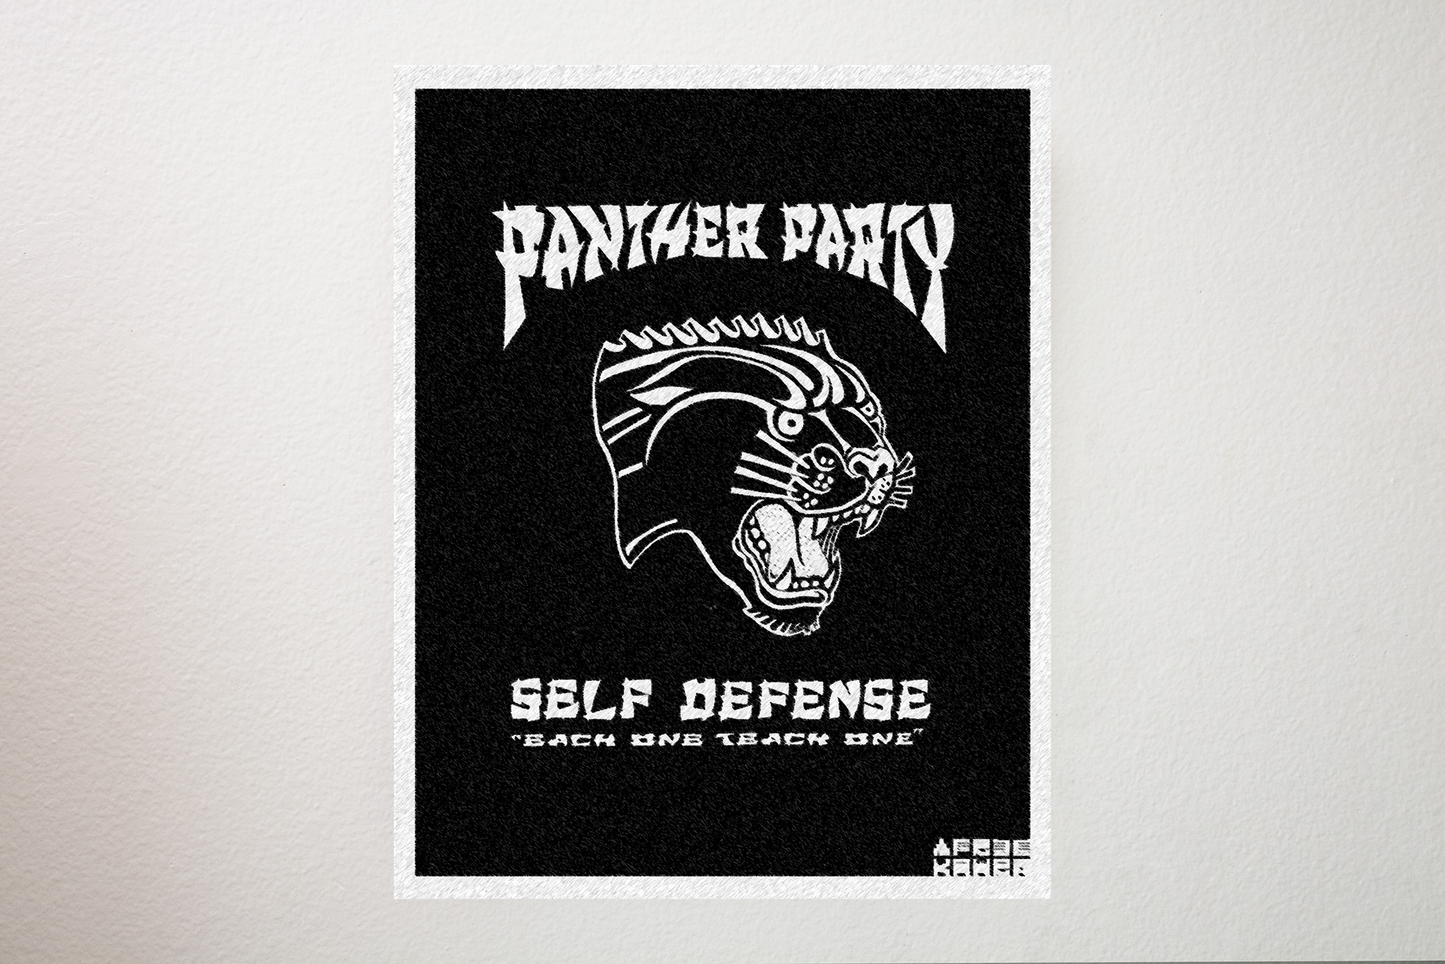 Panther Party Print 8.5" x 11"